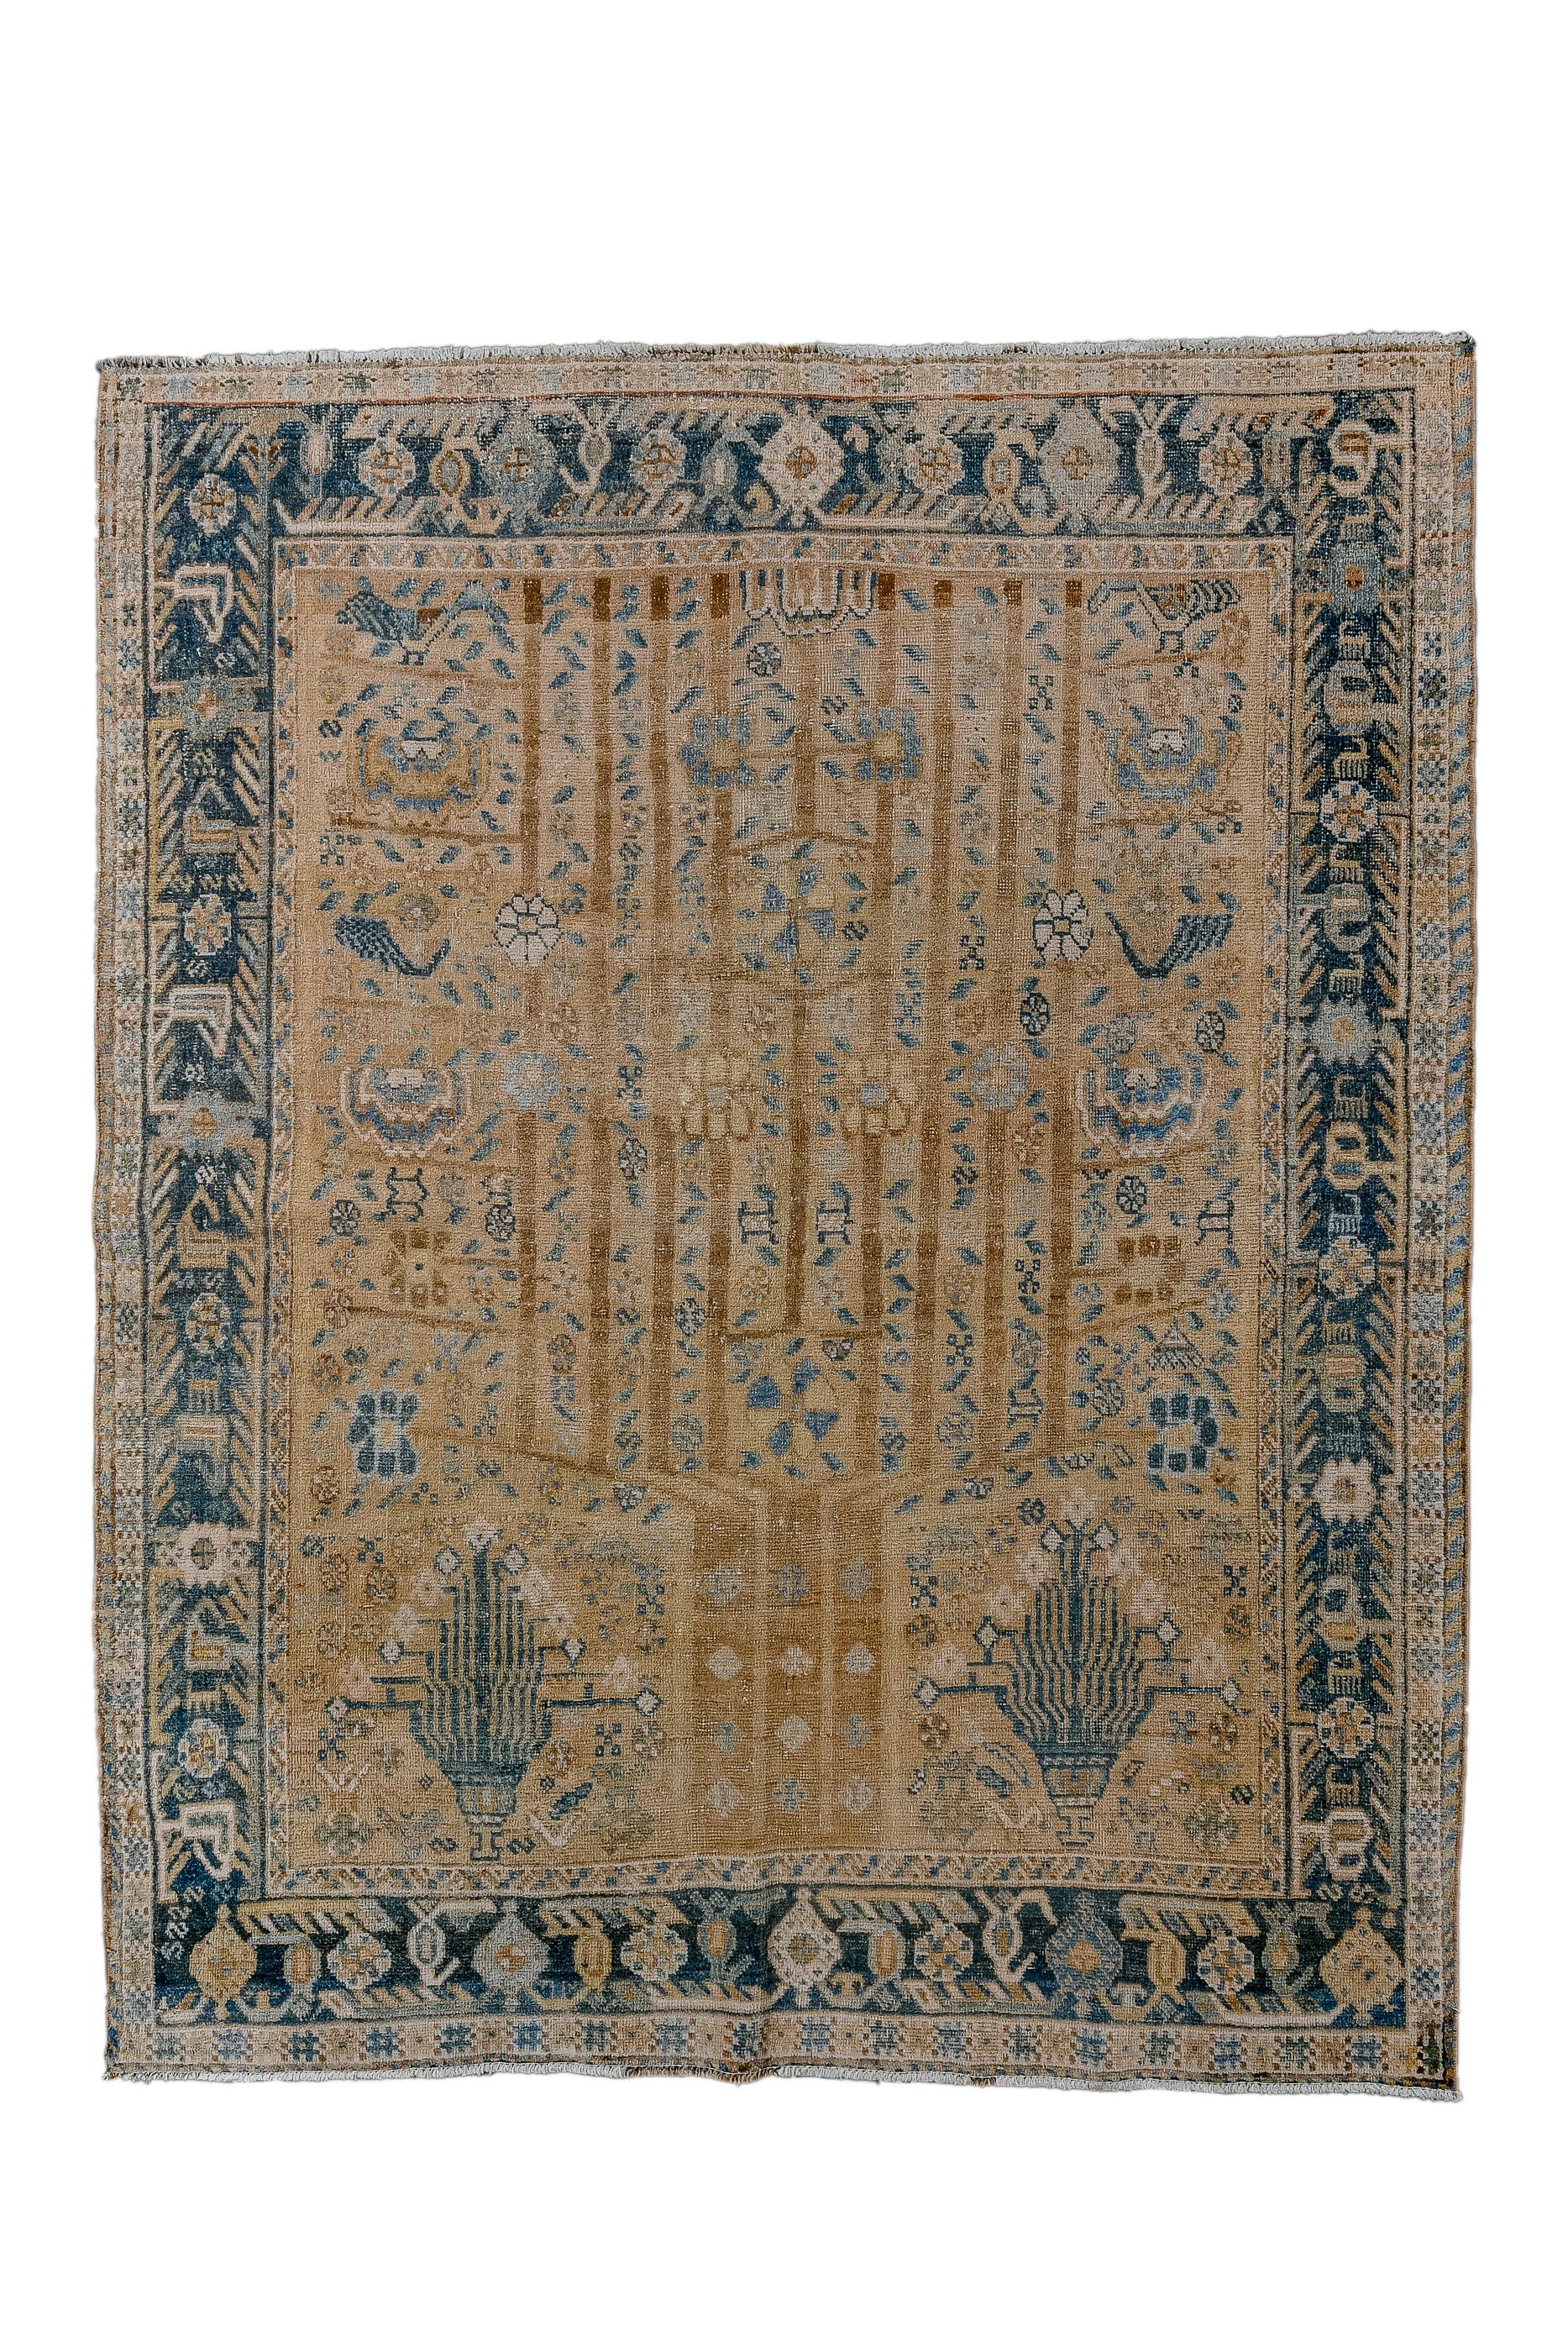 Tabriz with a golden camel field based on two flourishing vases, and with a central three-trunked tree which divides upward nine upraised branches, with flowers, leaves and rosettes on and around the main motif.  Strip style slate main border with